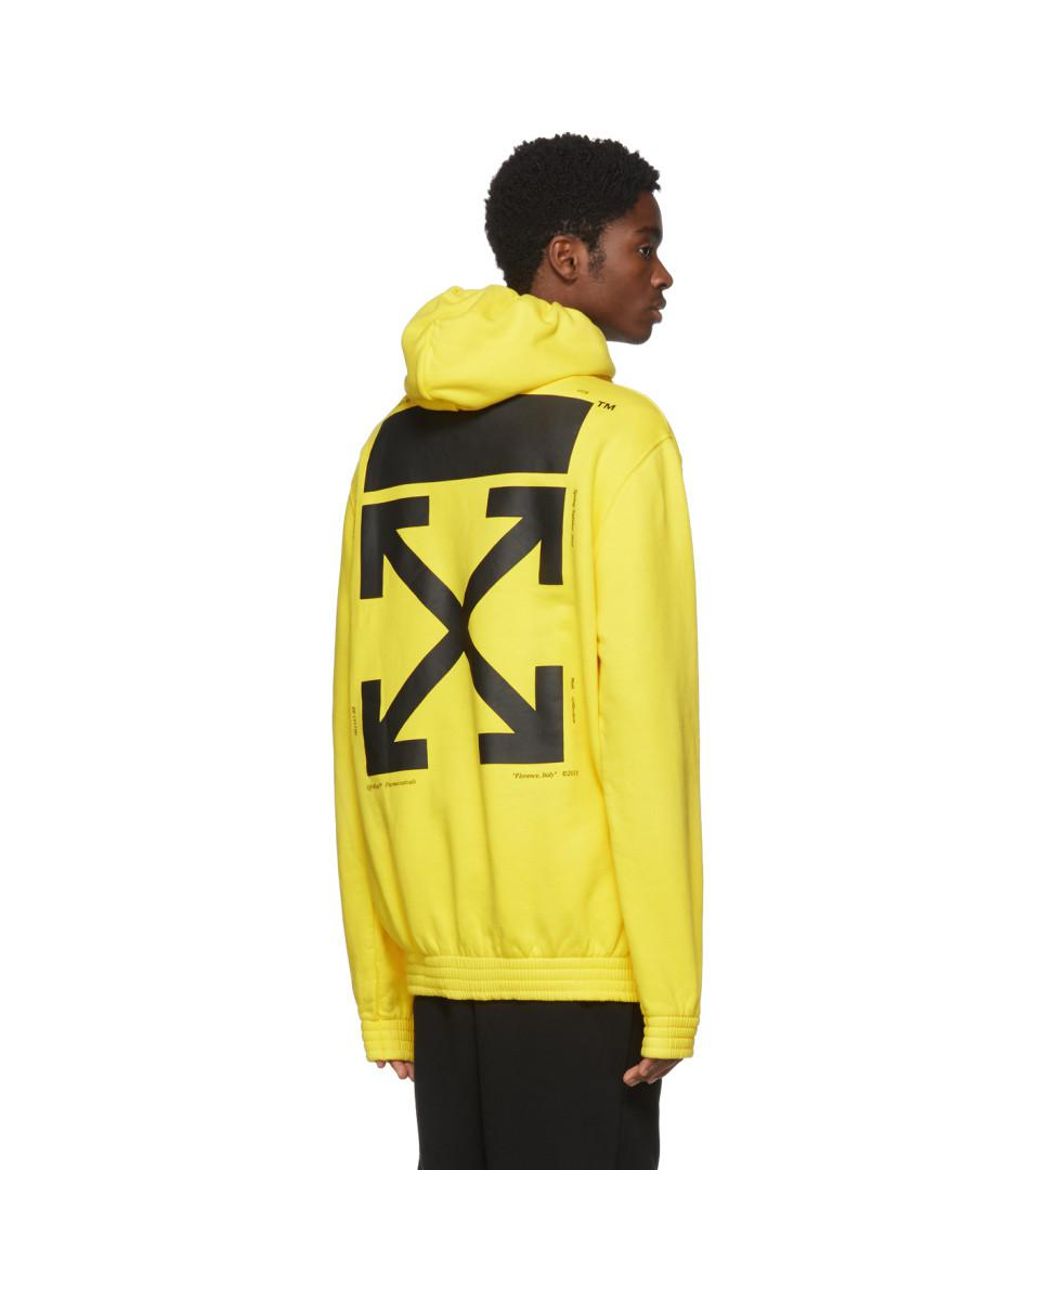 Off-White c/o Virgil Abloh 'hands' Hoodie in Yellow for Men